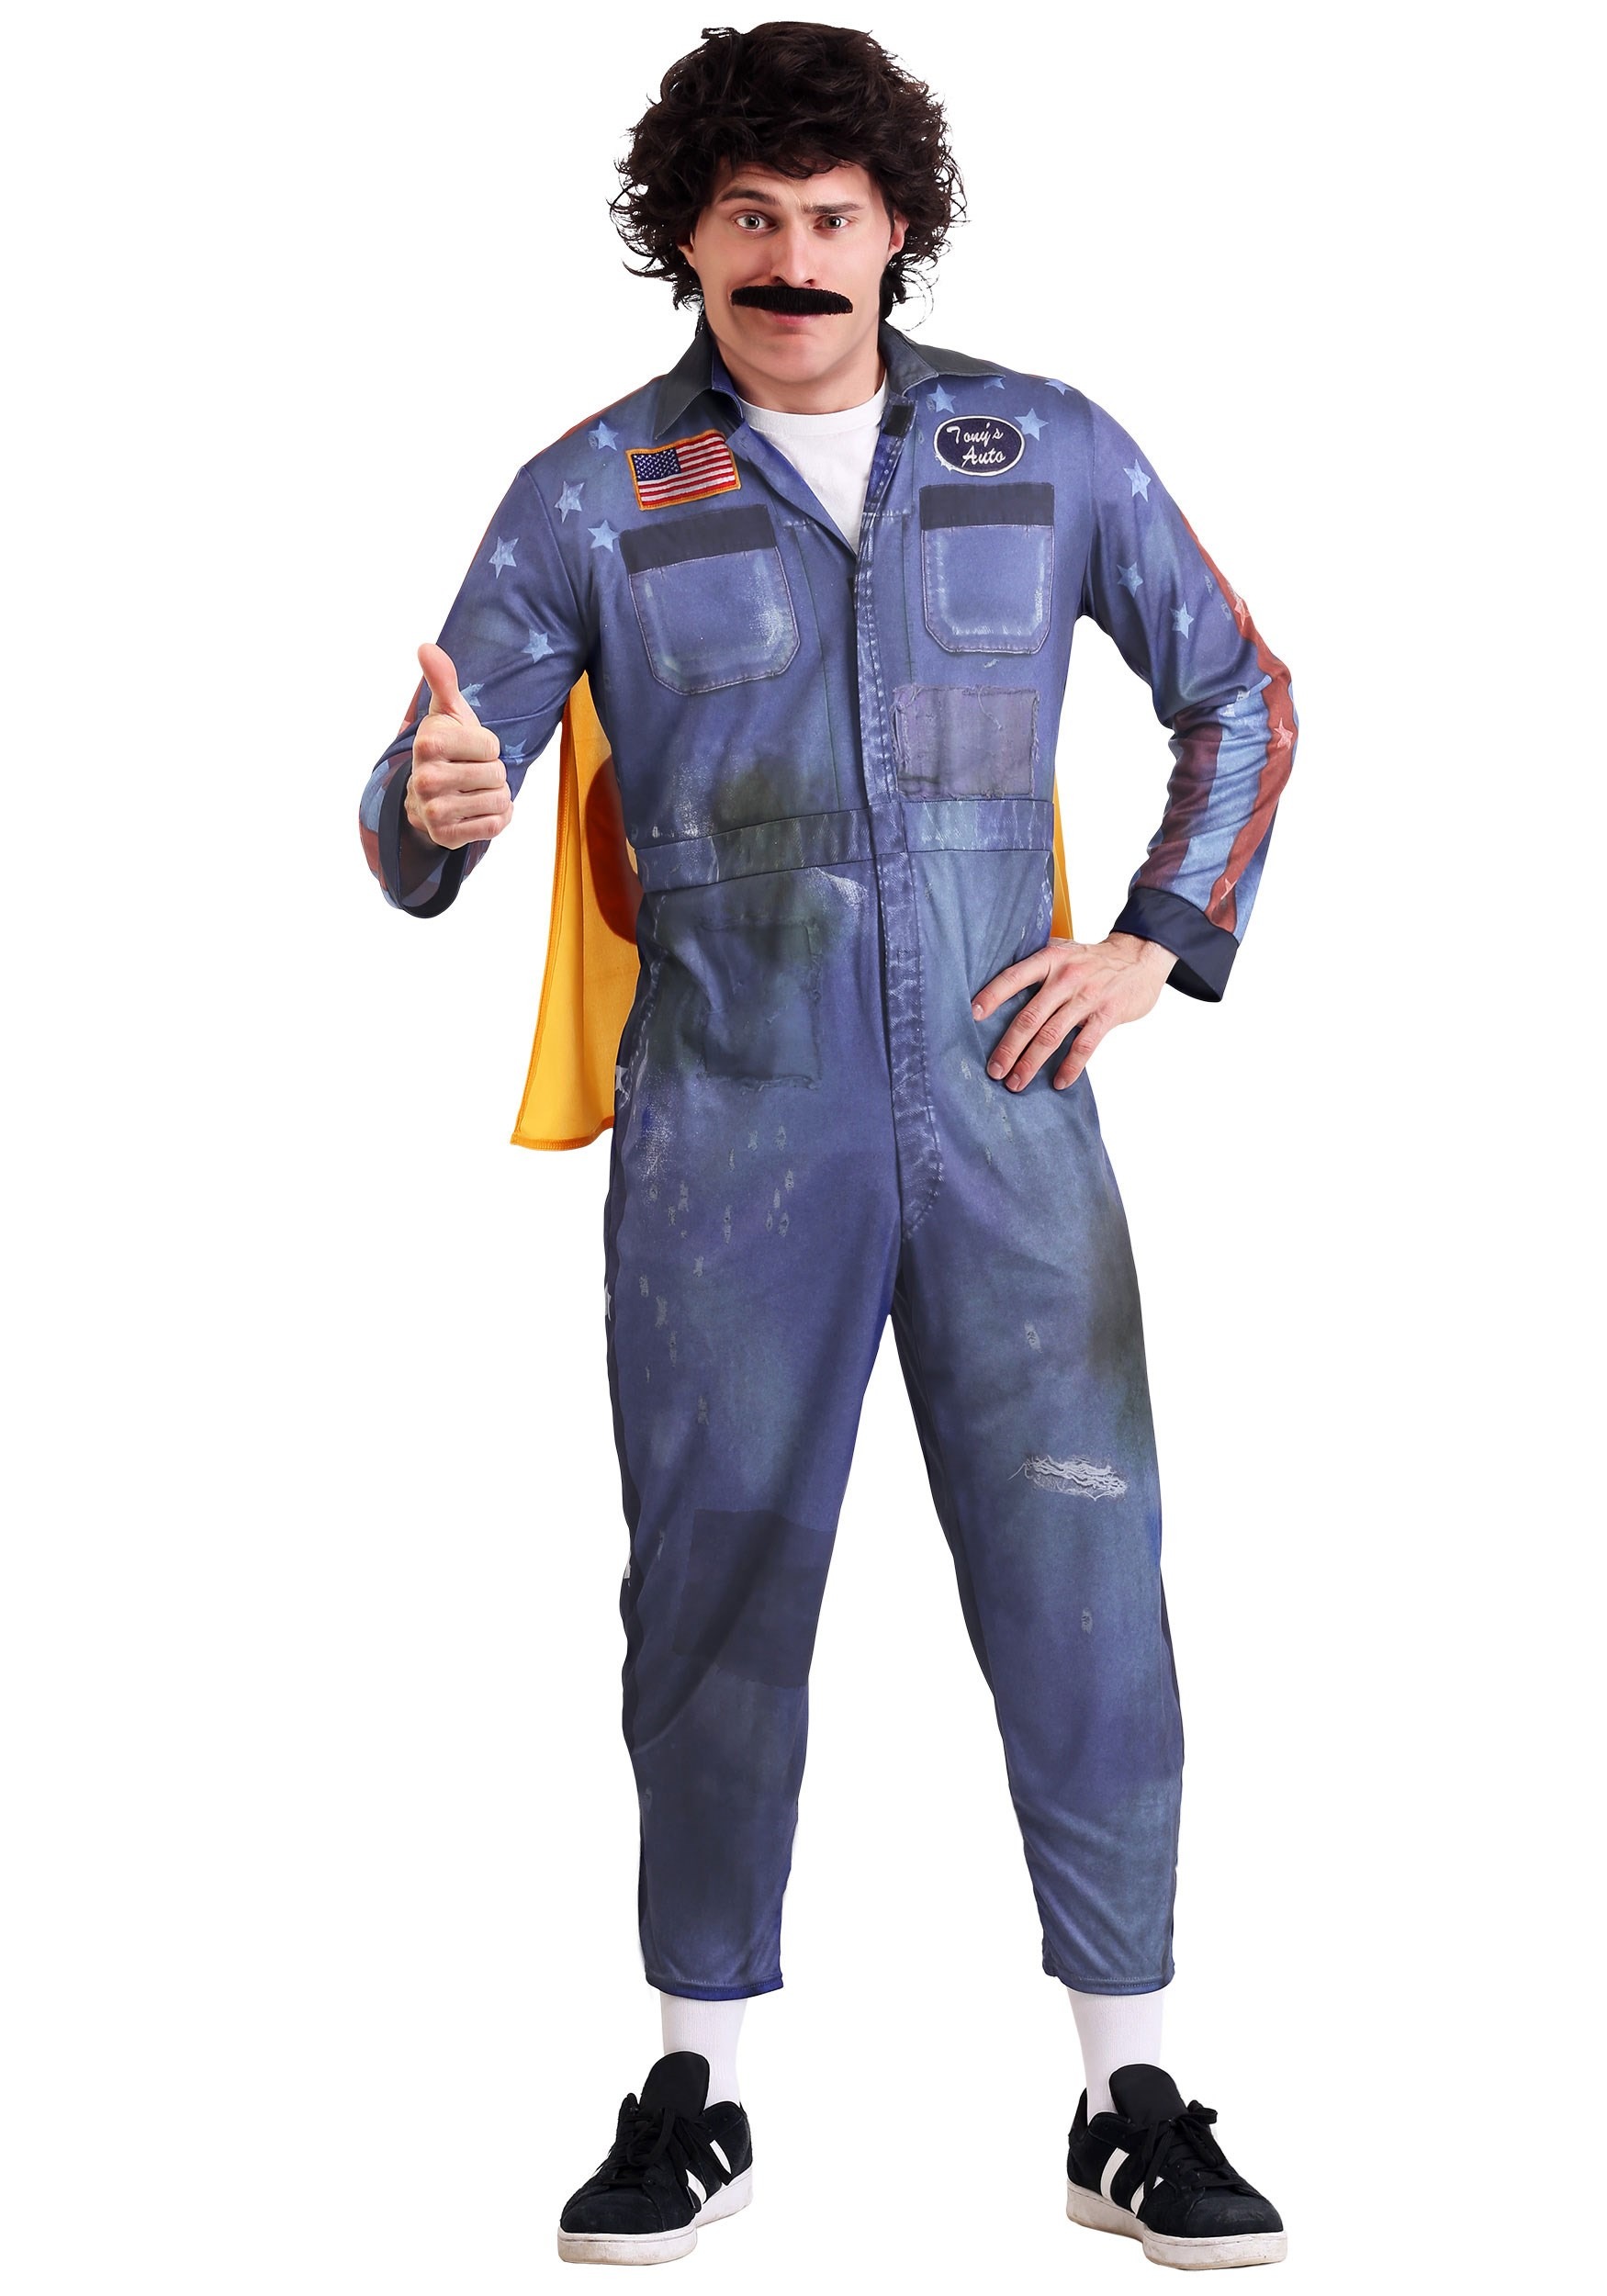 Image of Plus Size Hot Rod Rod Kimble Costume for Adults ID FUN0686PL-2X